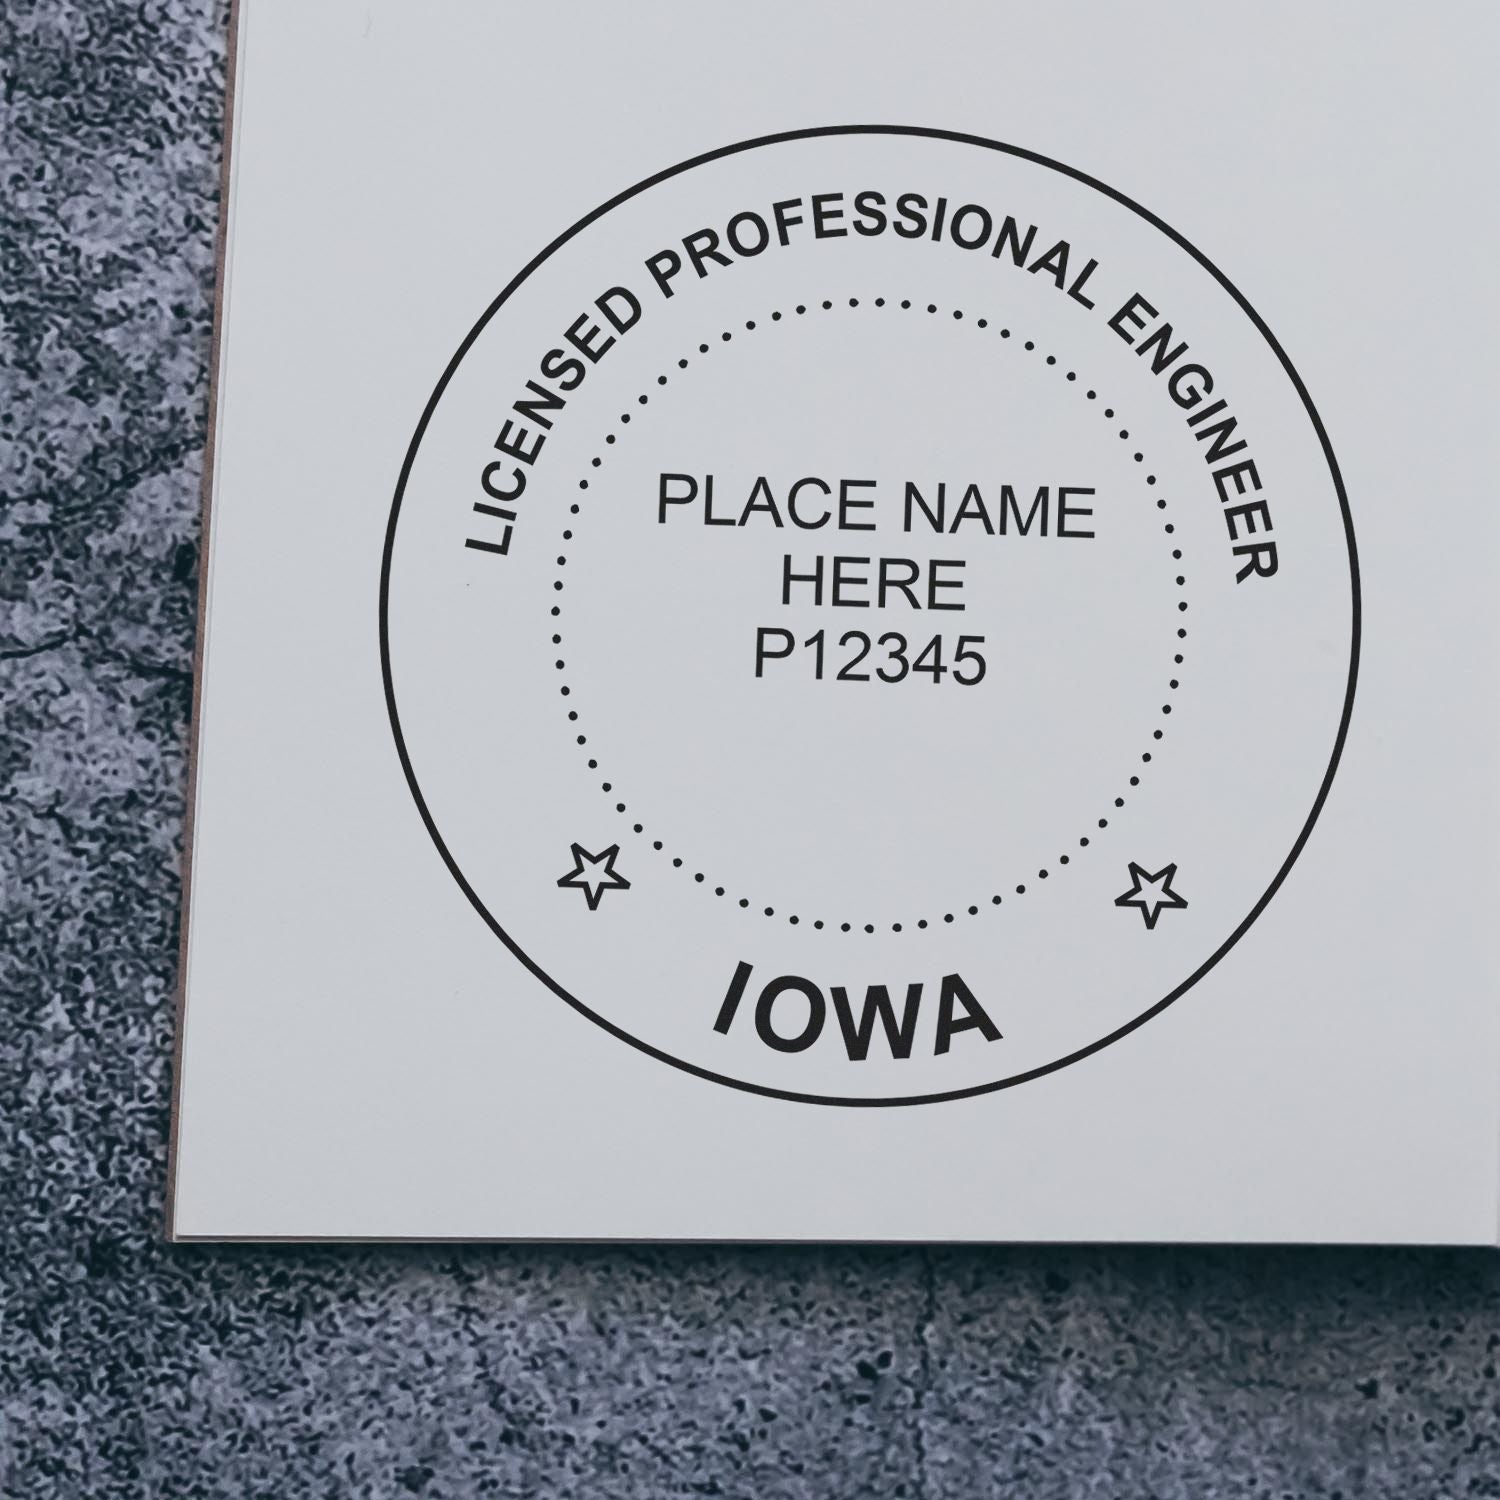 A lifestyle photo showing a stamped image of the Iowa Professional Engineer Seal Stamp on a piece of paper